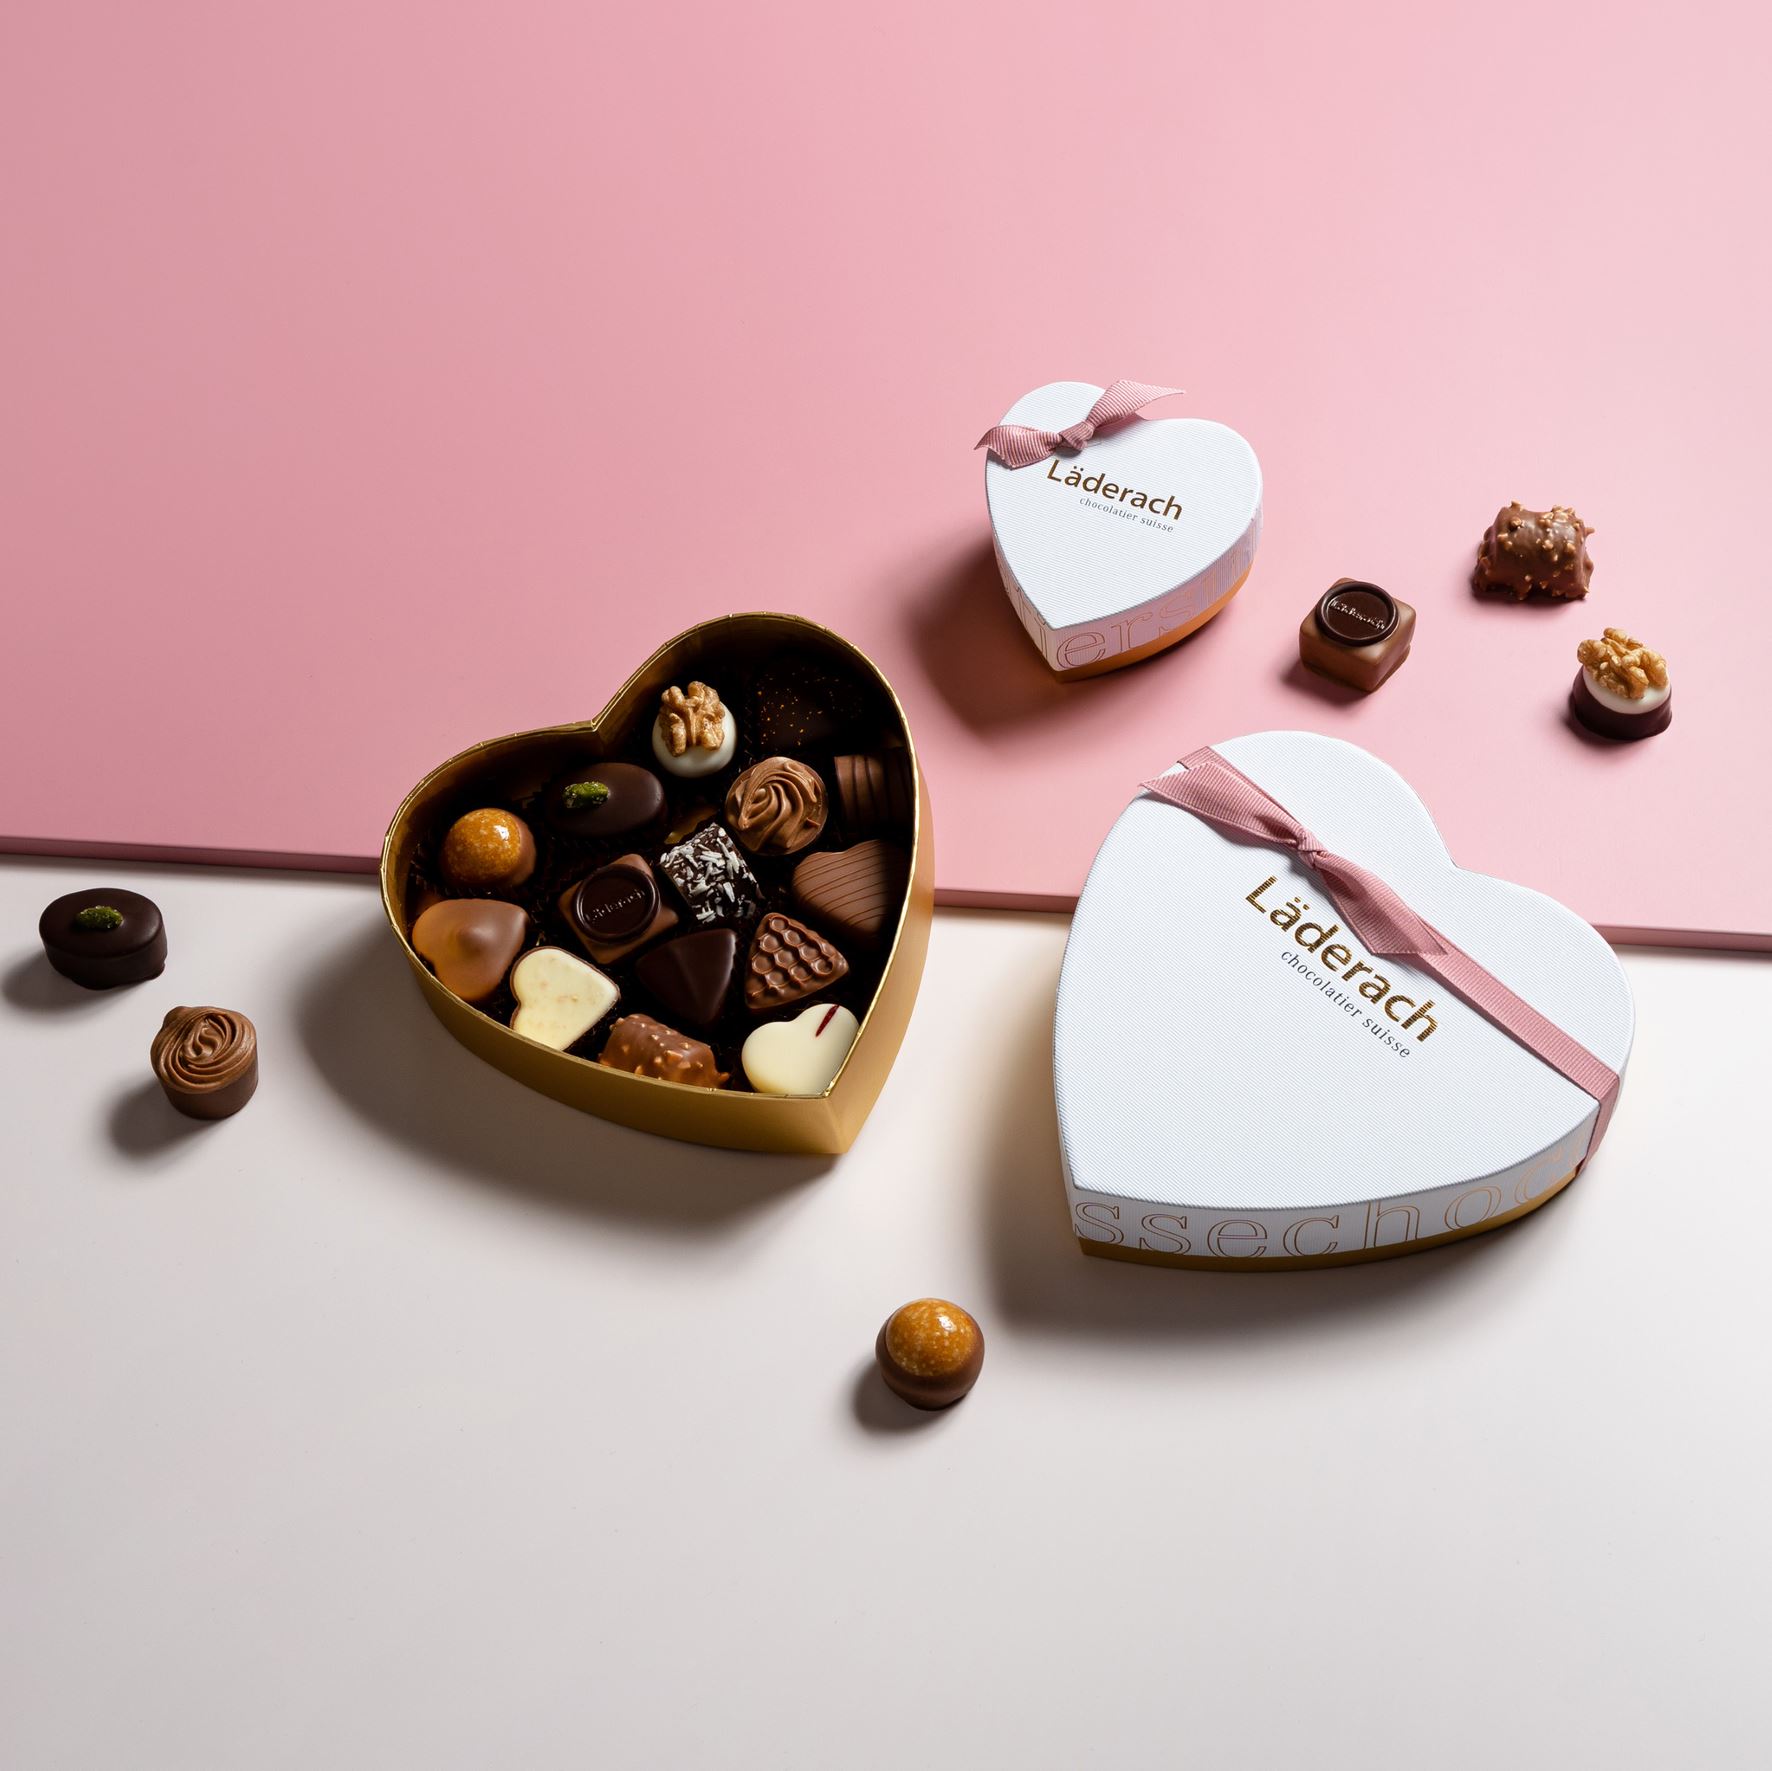 Heart shaped boxes of chocolate